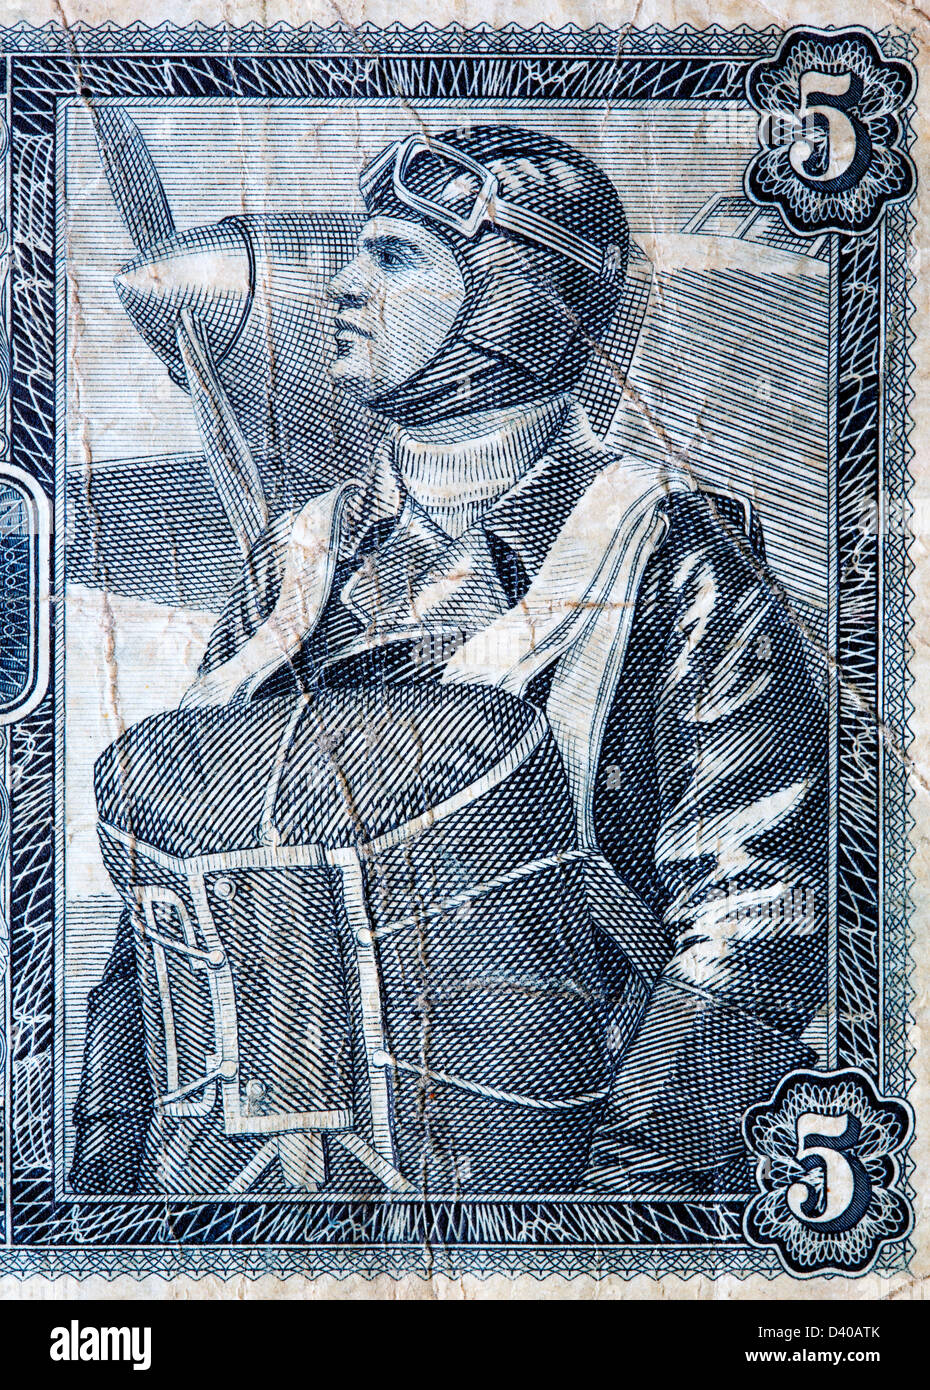 Aviator from 5 Rubles banknote, Russia, 1938 Stock Photo